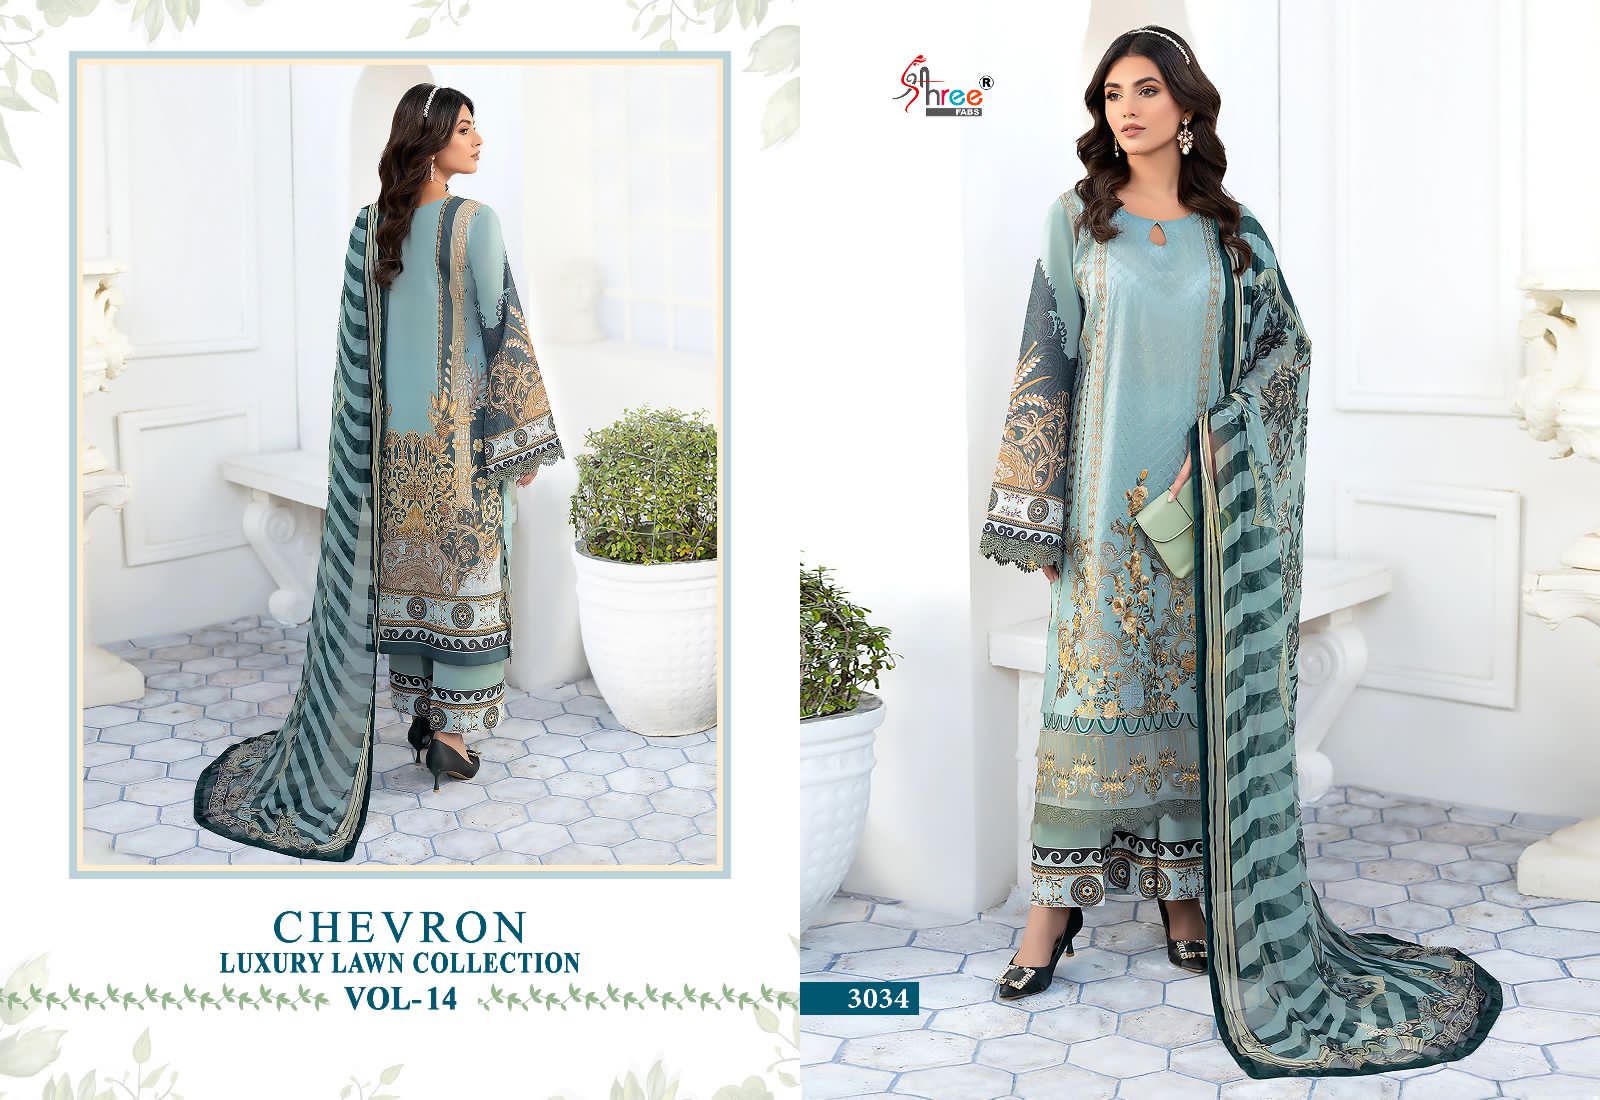 Shree Chevron Luxury Lawn Collection Vol 14 collection 1